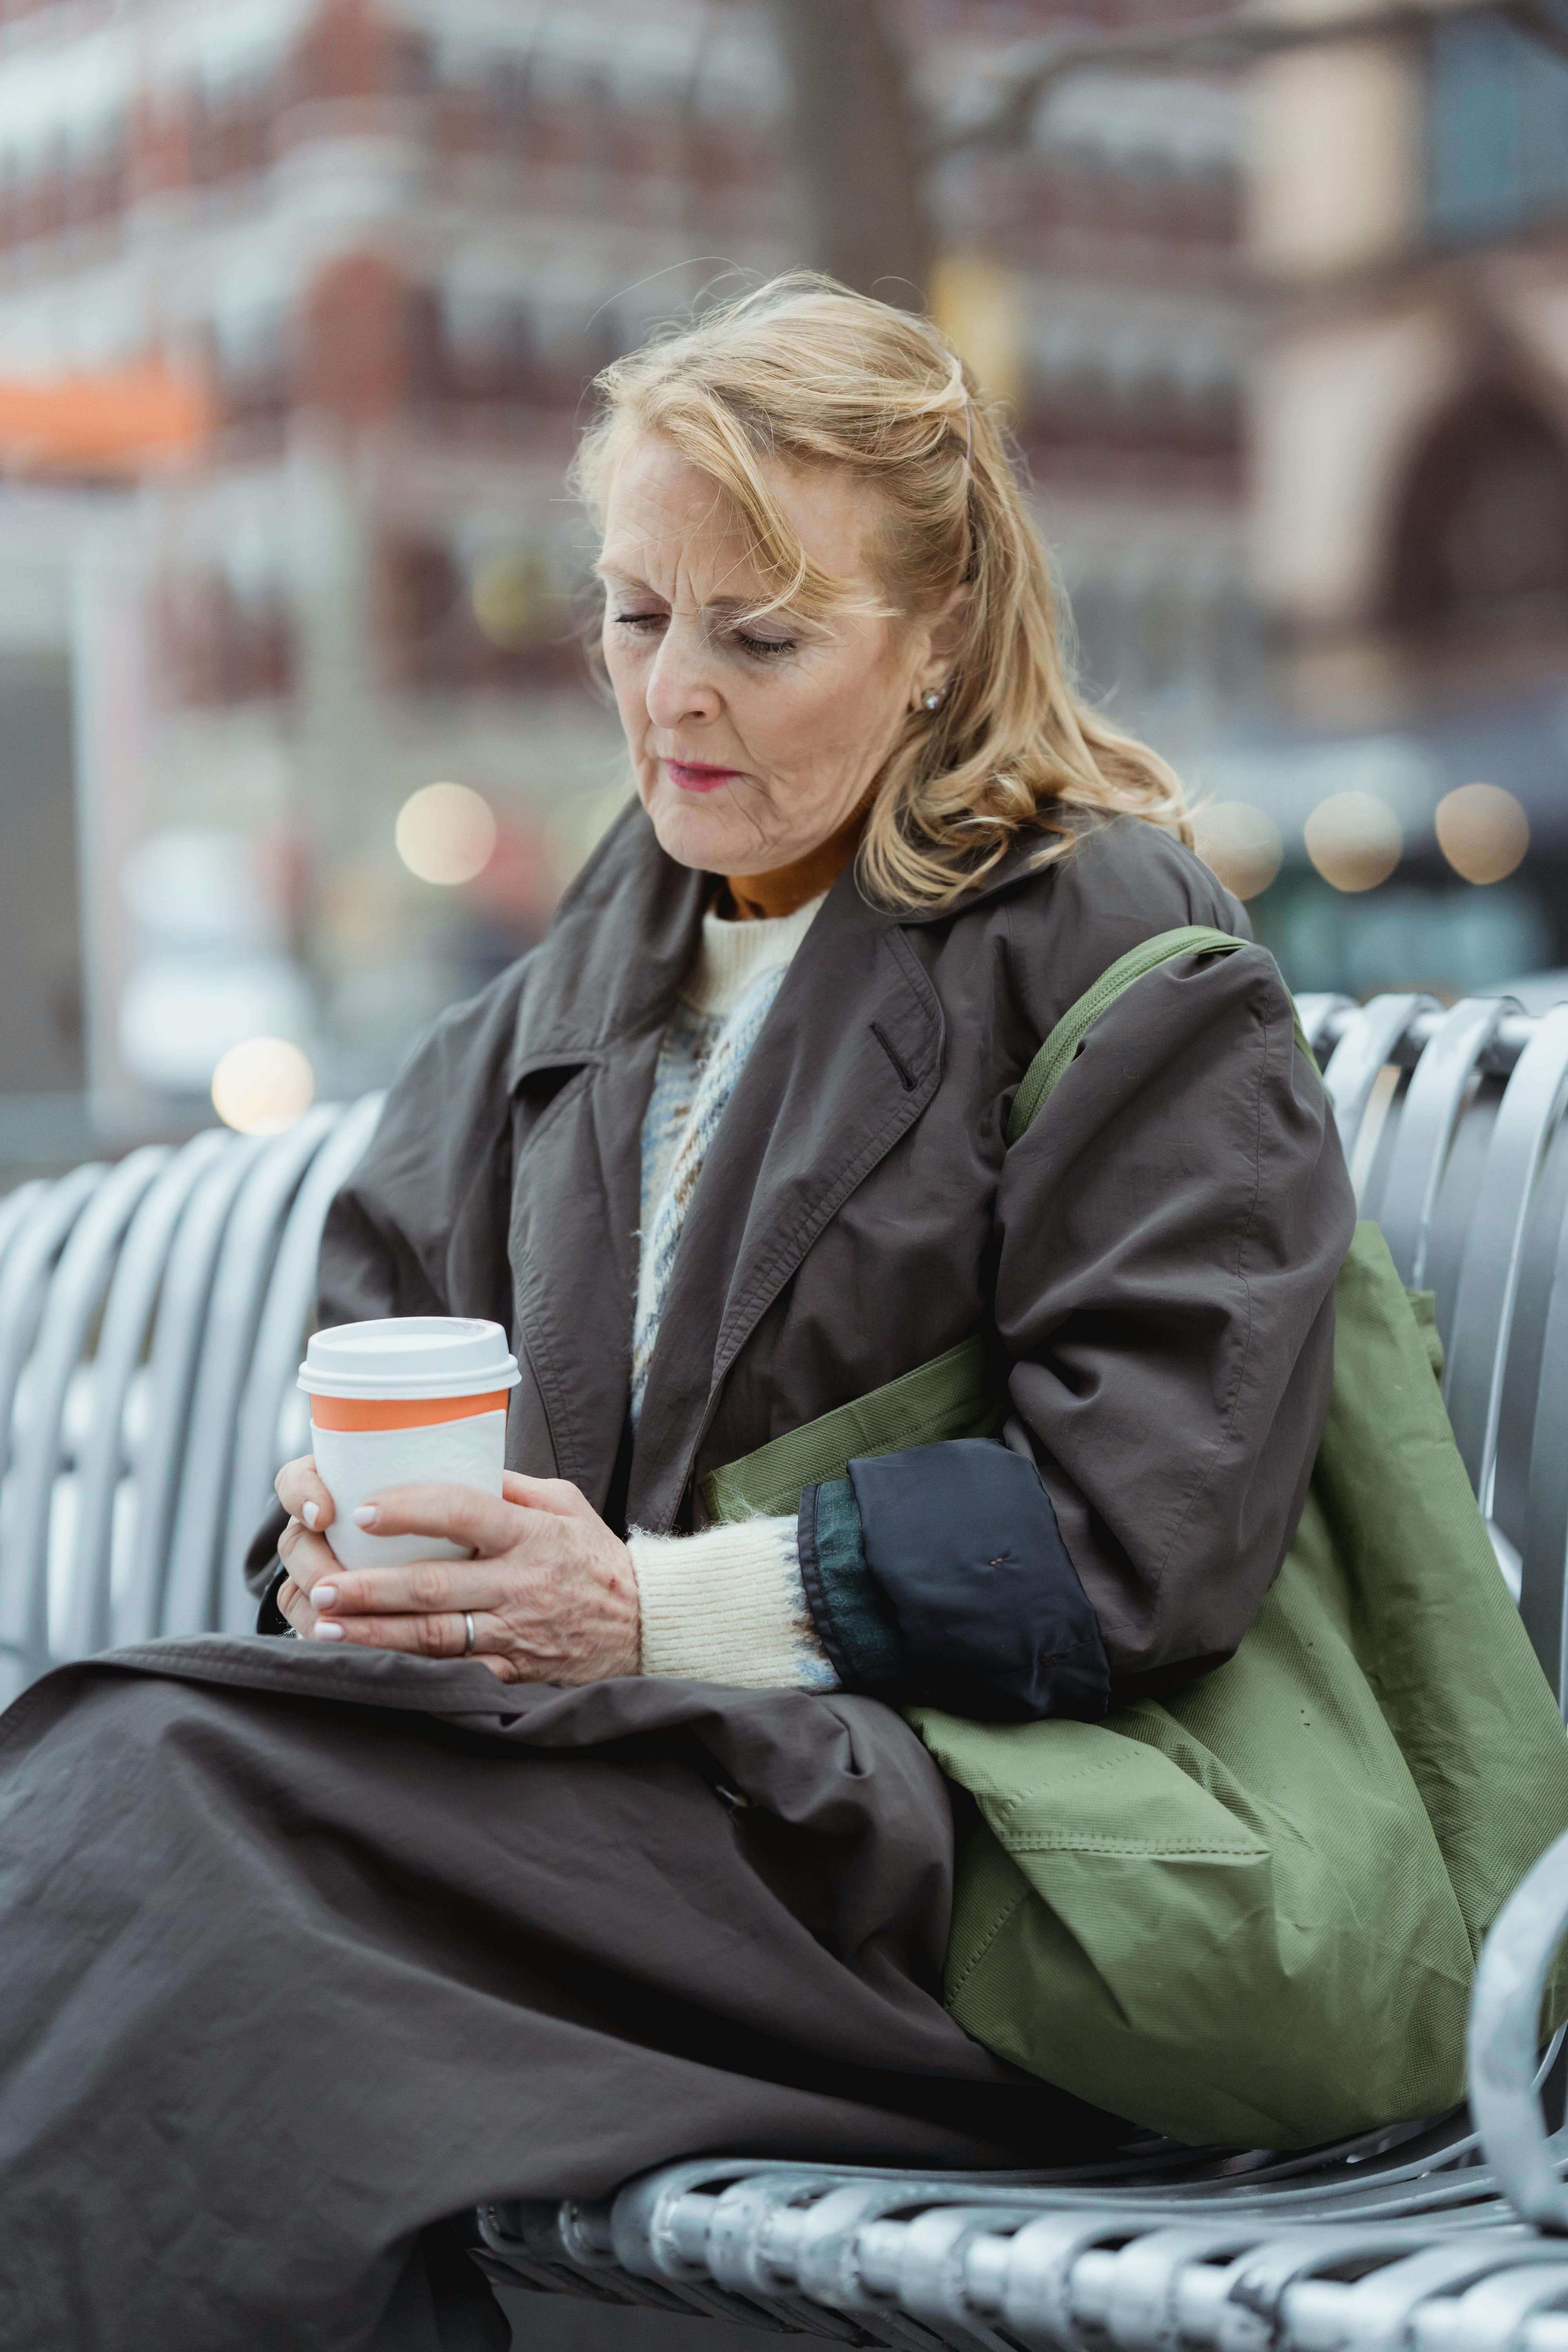 An upset older woman sitting on a bench holding a beverage | Source: Pexels